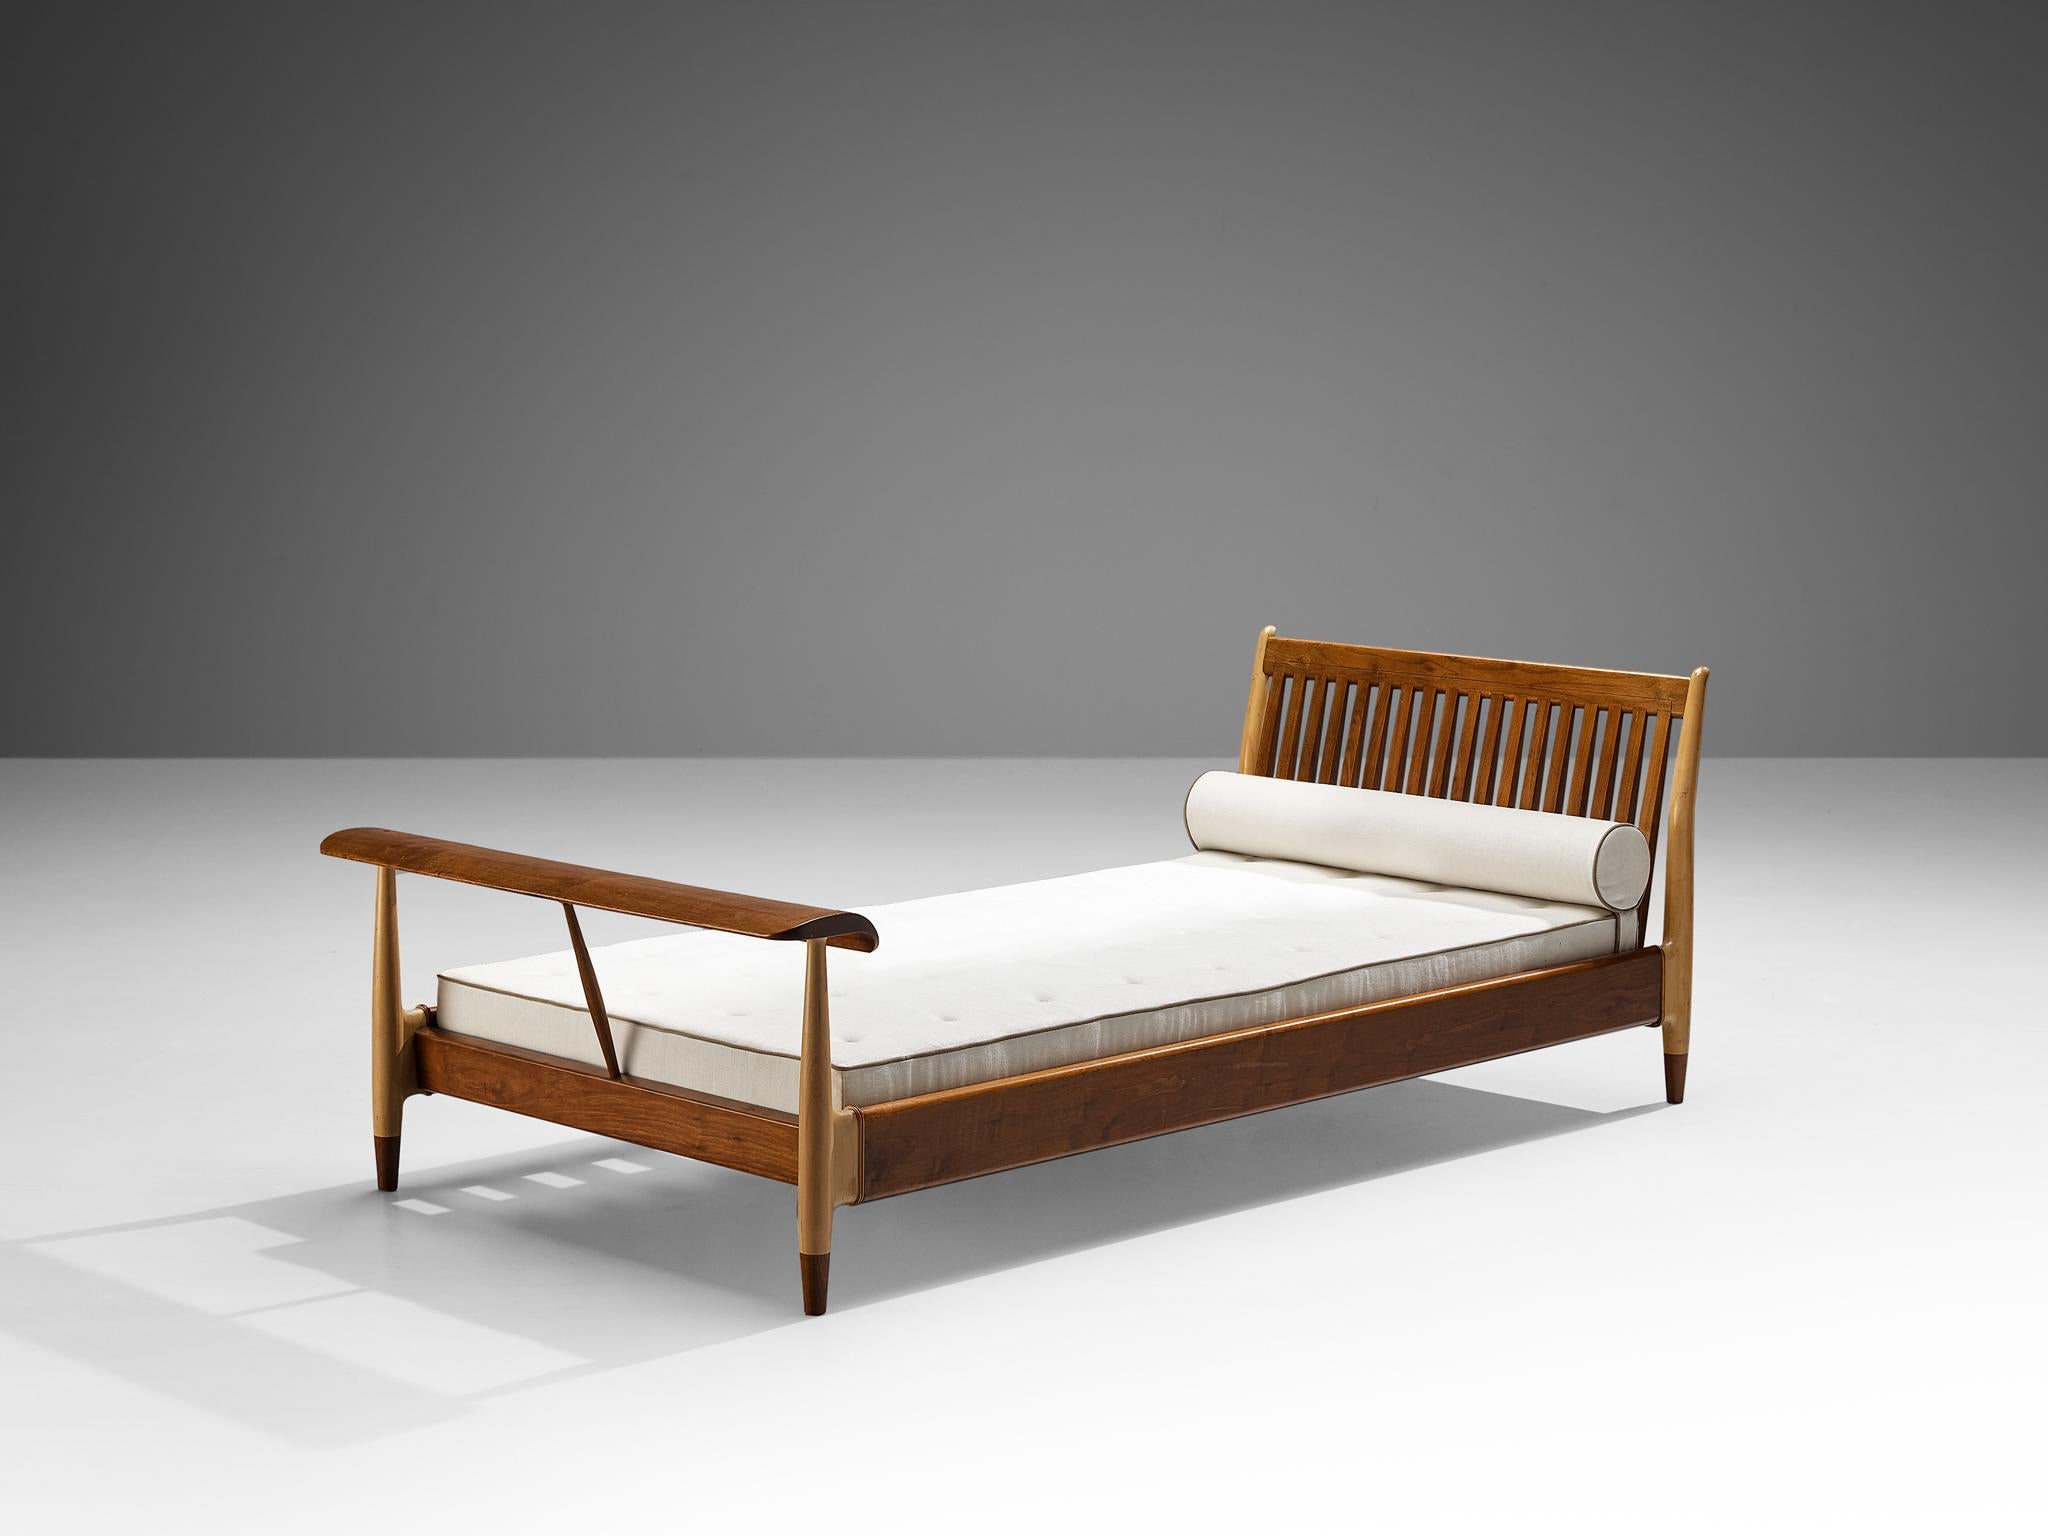 Finn Juhl for Baker Furniture, daybed, walnut, birch, USA/Denmark, ca. 1951

Elegant and beautiful bed designed by Finn Juhl around 1951. This daybed is made from several types of wood which gives its appearance a beautiful contrast. The slatted